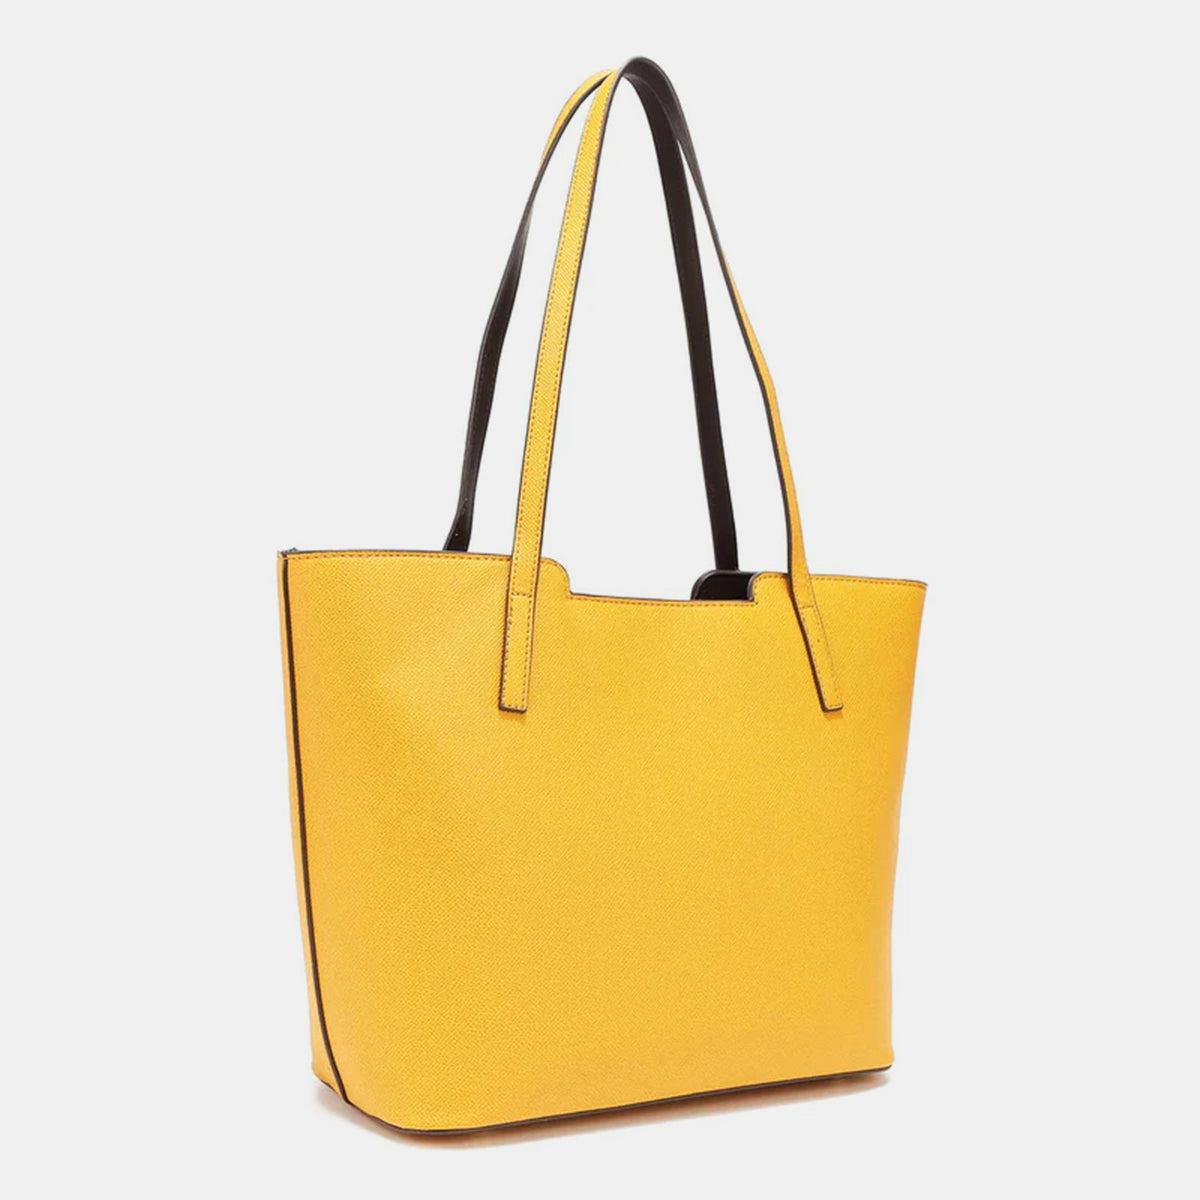 a yellow tote bag on a white background